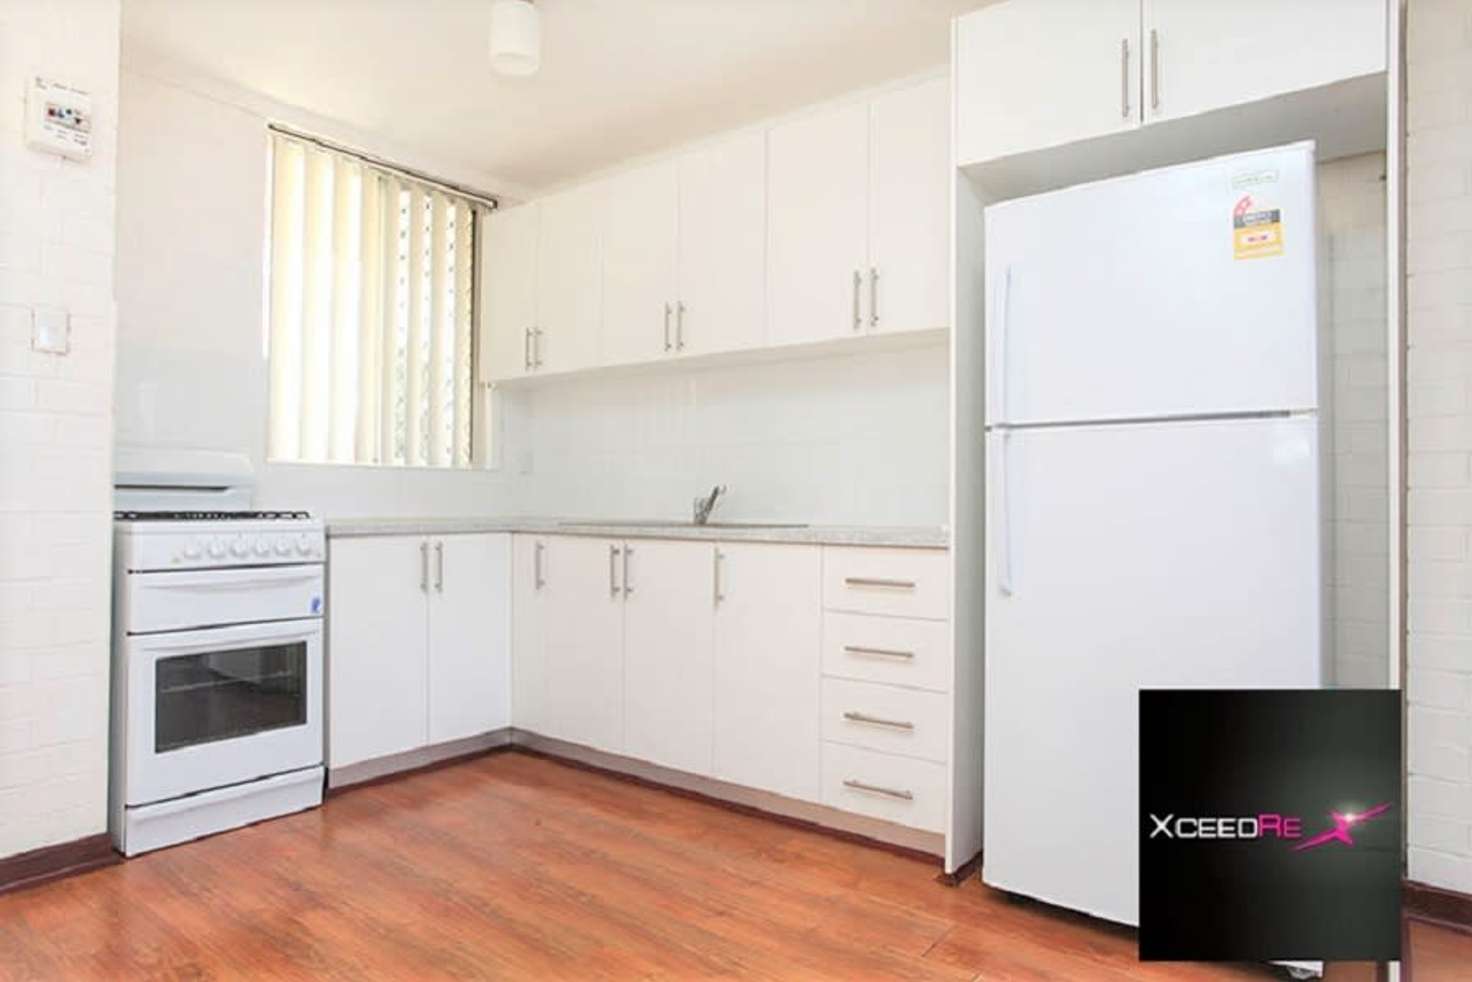 Main view of Homely unit listing, 24/26 Stanley St, Mount Lawley WA 6050